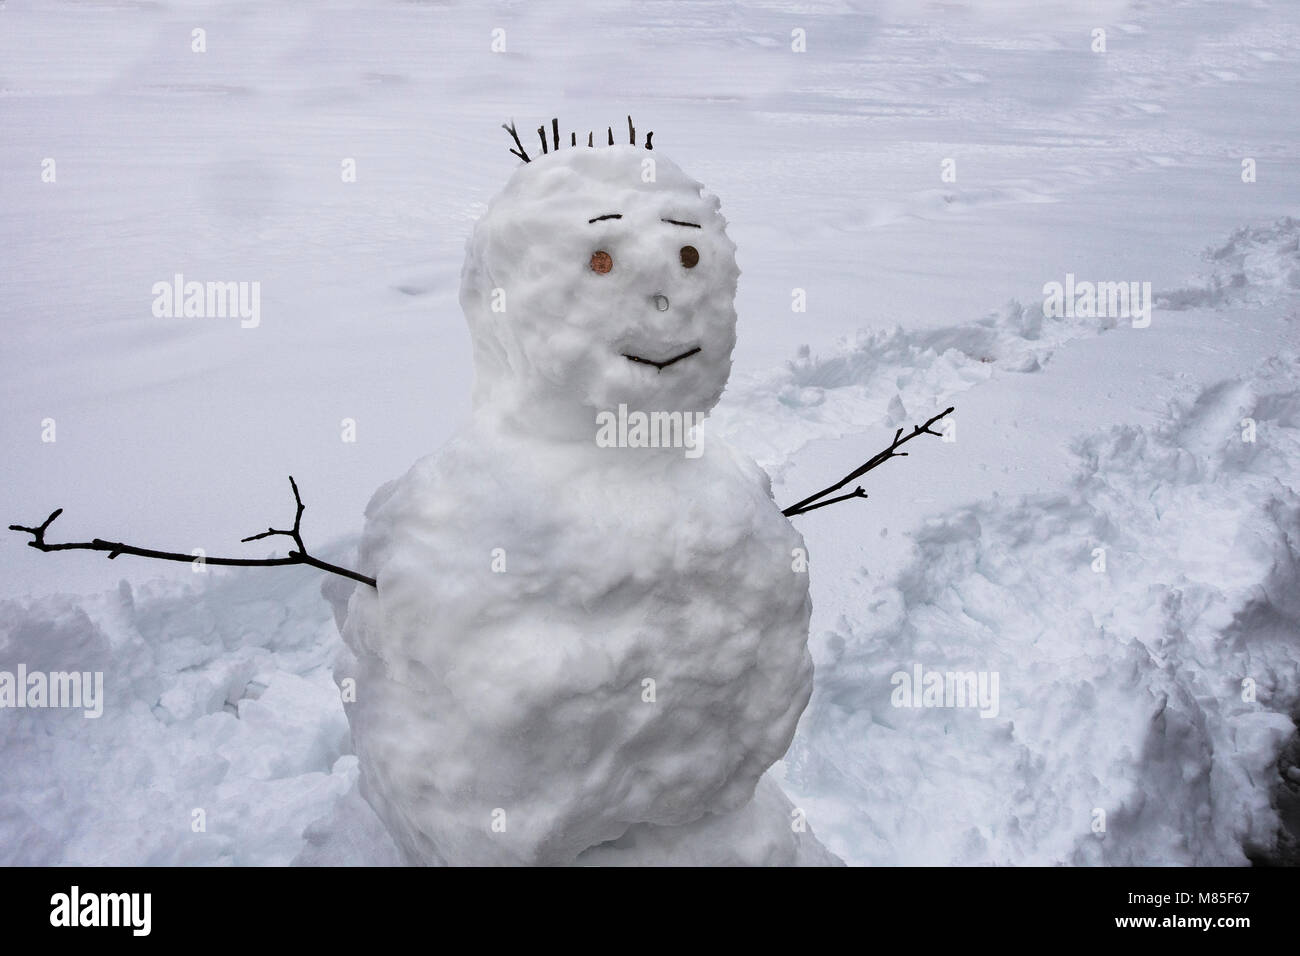 White snowman with sticks as arms pennies as eyes pop can top as nose rocks as mouth Stock Photo